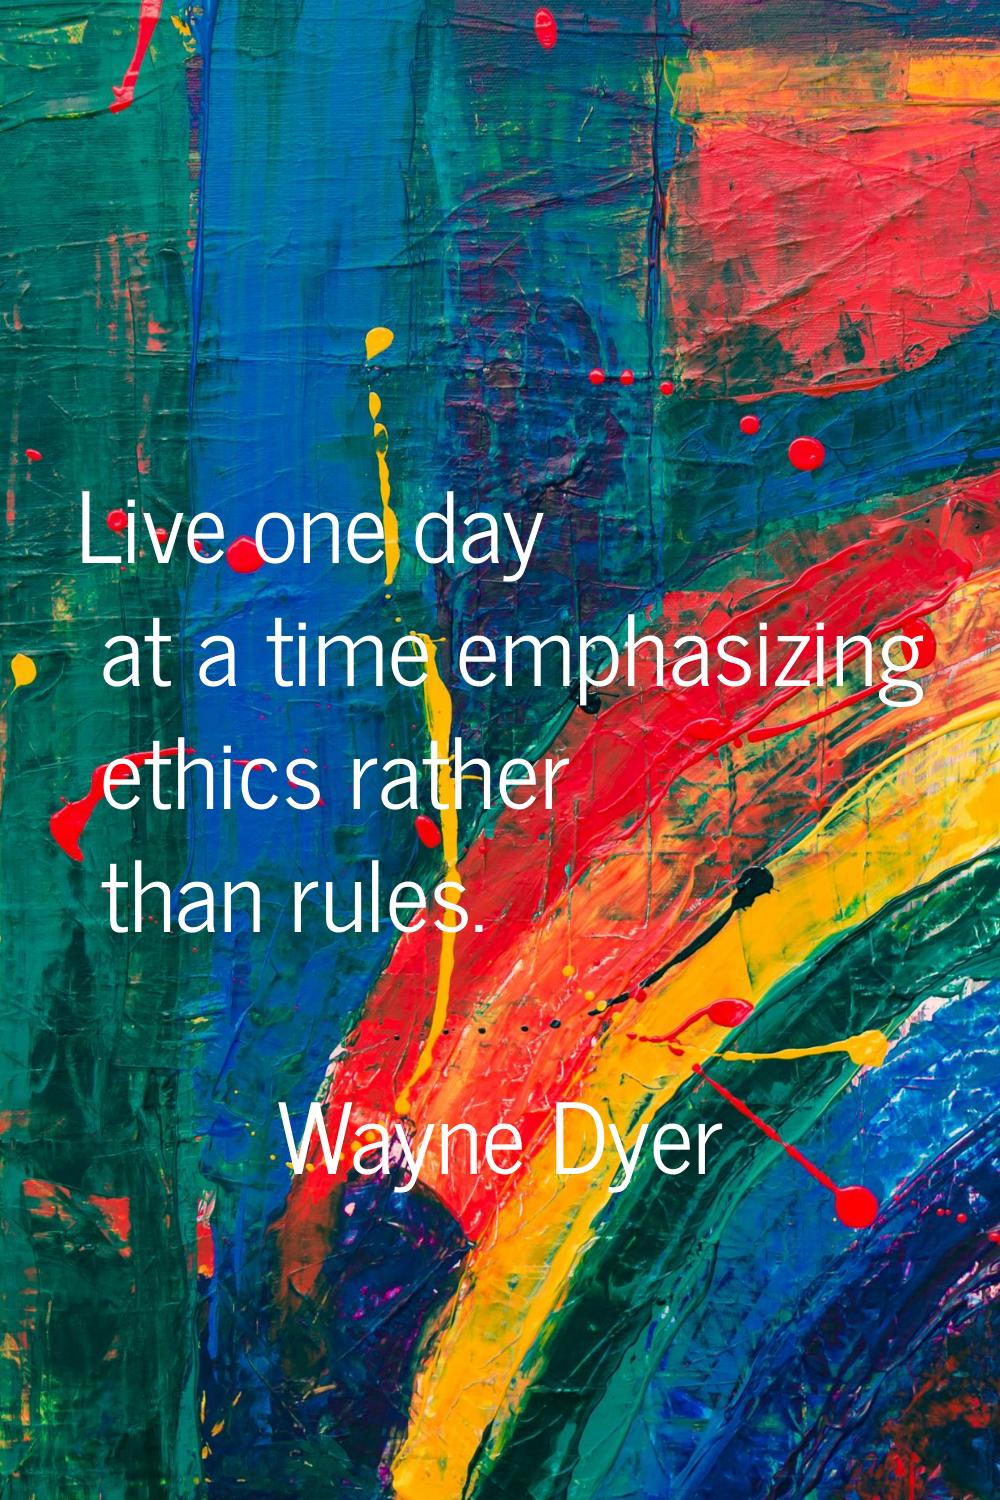 Live one day at a time emphasizing ethics rather than rules.